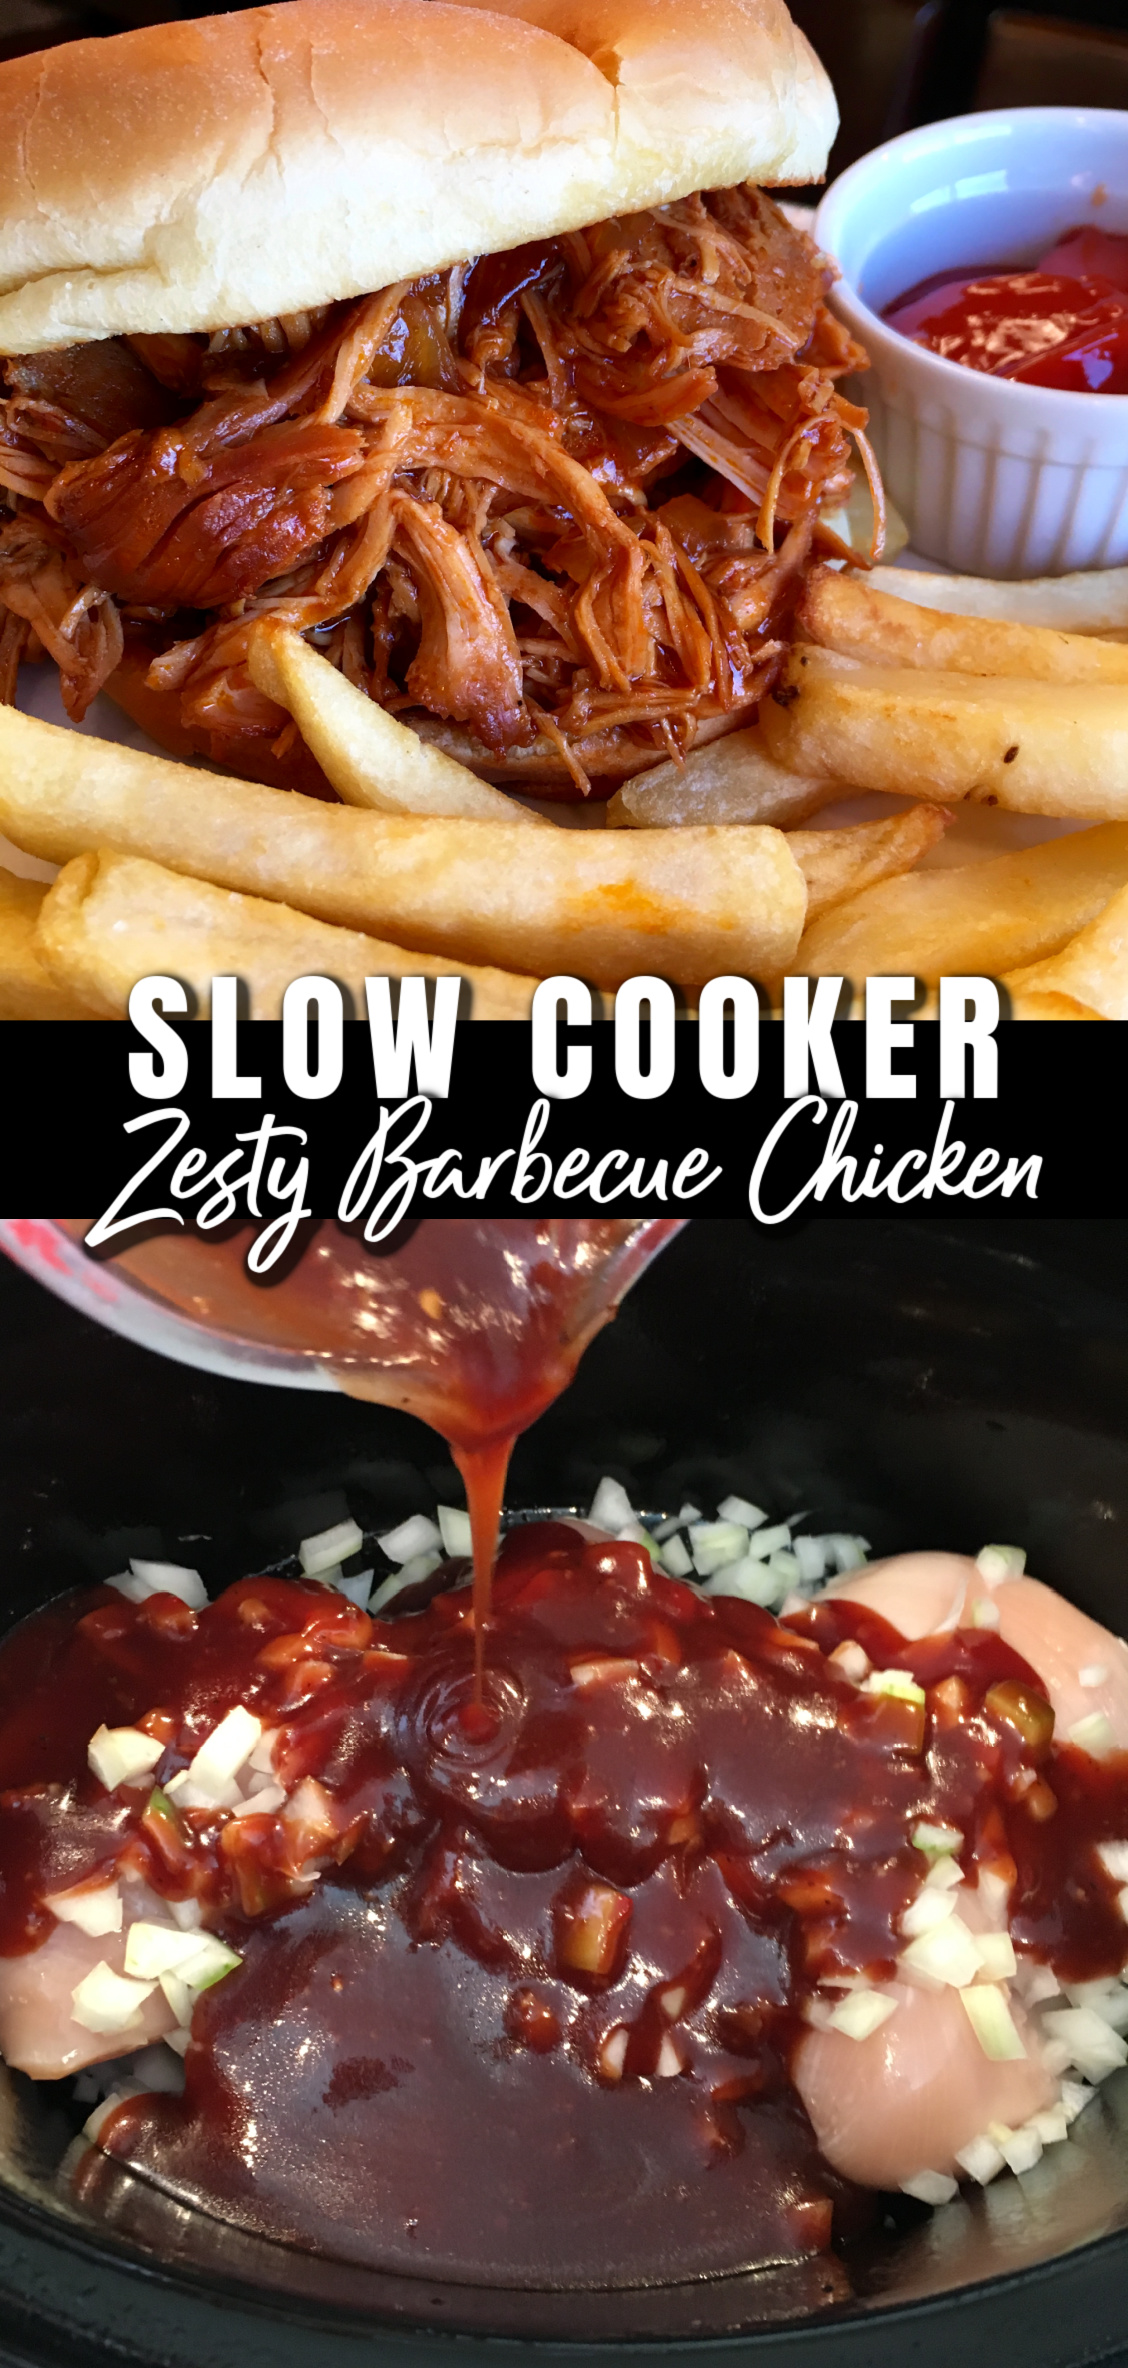 This is a 2 photo collage. The top image shows the chicken served on a roll with a side of french fries. The bottom photo shows the chicken in the slow cooker with the sauce being poured over top, before cooking. 